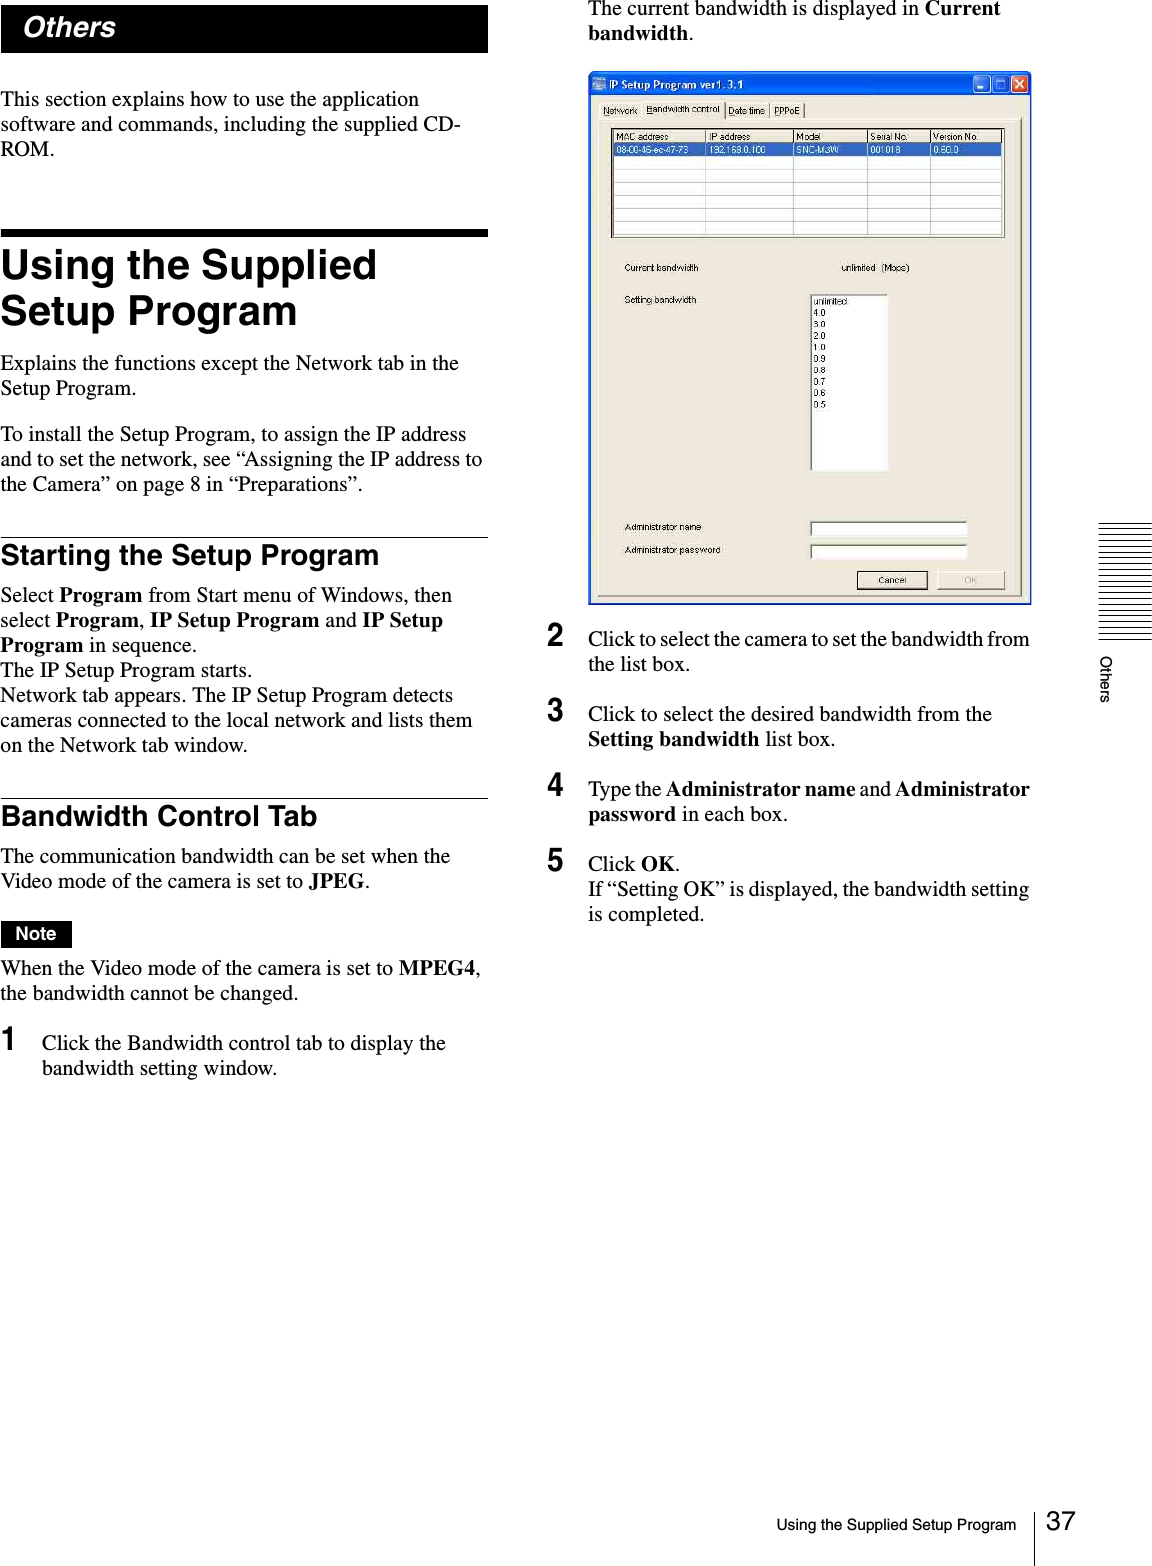 OthersUsing the Supplied Setup Program 37OthersThis section explains how to use the application software and commands, including the supplied CD-ROM.Using the Supplied Setup ProgramExplains the functions except the Network tab in the Setup Program.To install the Setup Program, to assign the IP address and to set the network, see “Assigning the IP address to the Camera” on page 8 in “Preparations”.Starting the Setup ProgramSelect Program from Start menu of Windows, then select Program, IP Setup Program and IP Setup Program in sequence.The IP Setup Program starts.Network tab appears. The IP Setup Program detects cameras connected to the local network and lists them on the Network tab window.Bandwidth Control TabThe communication bandwidth can be set when the Video mode of the camera is set to JPEG.NoteWhen the Video mode of the camera is set to MPEG4, the bandwidth cannot be changed.1Click the Bandwidth control tab to display the bandwidth setting window.The current bandwidth is displayed in Current bandwidth.2Click to select the camera to set the bandwidth from the list box.3Click to select the desired bandwidth from the Setting bandwidth list box.4Type the Administrator name and Administrator password in each box.5Click OK.If “Setting OK” is displayed, the bandwidth setting is completed.